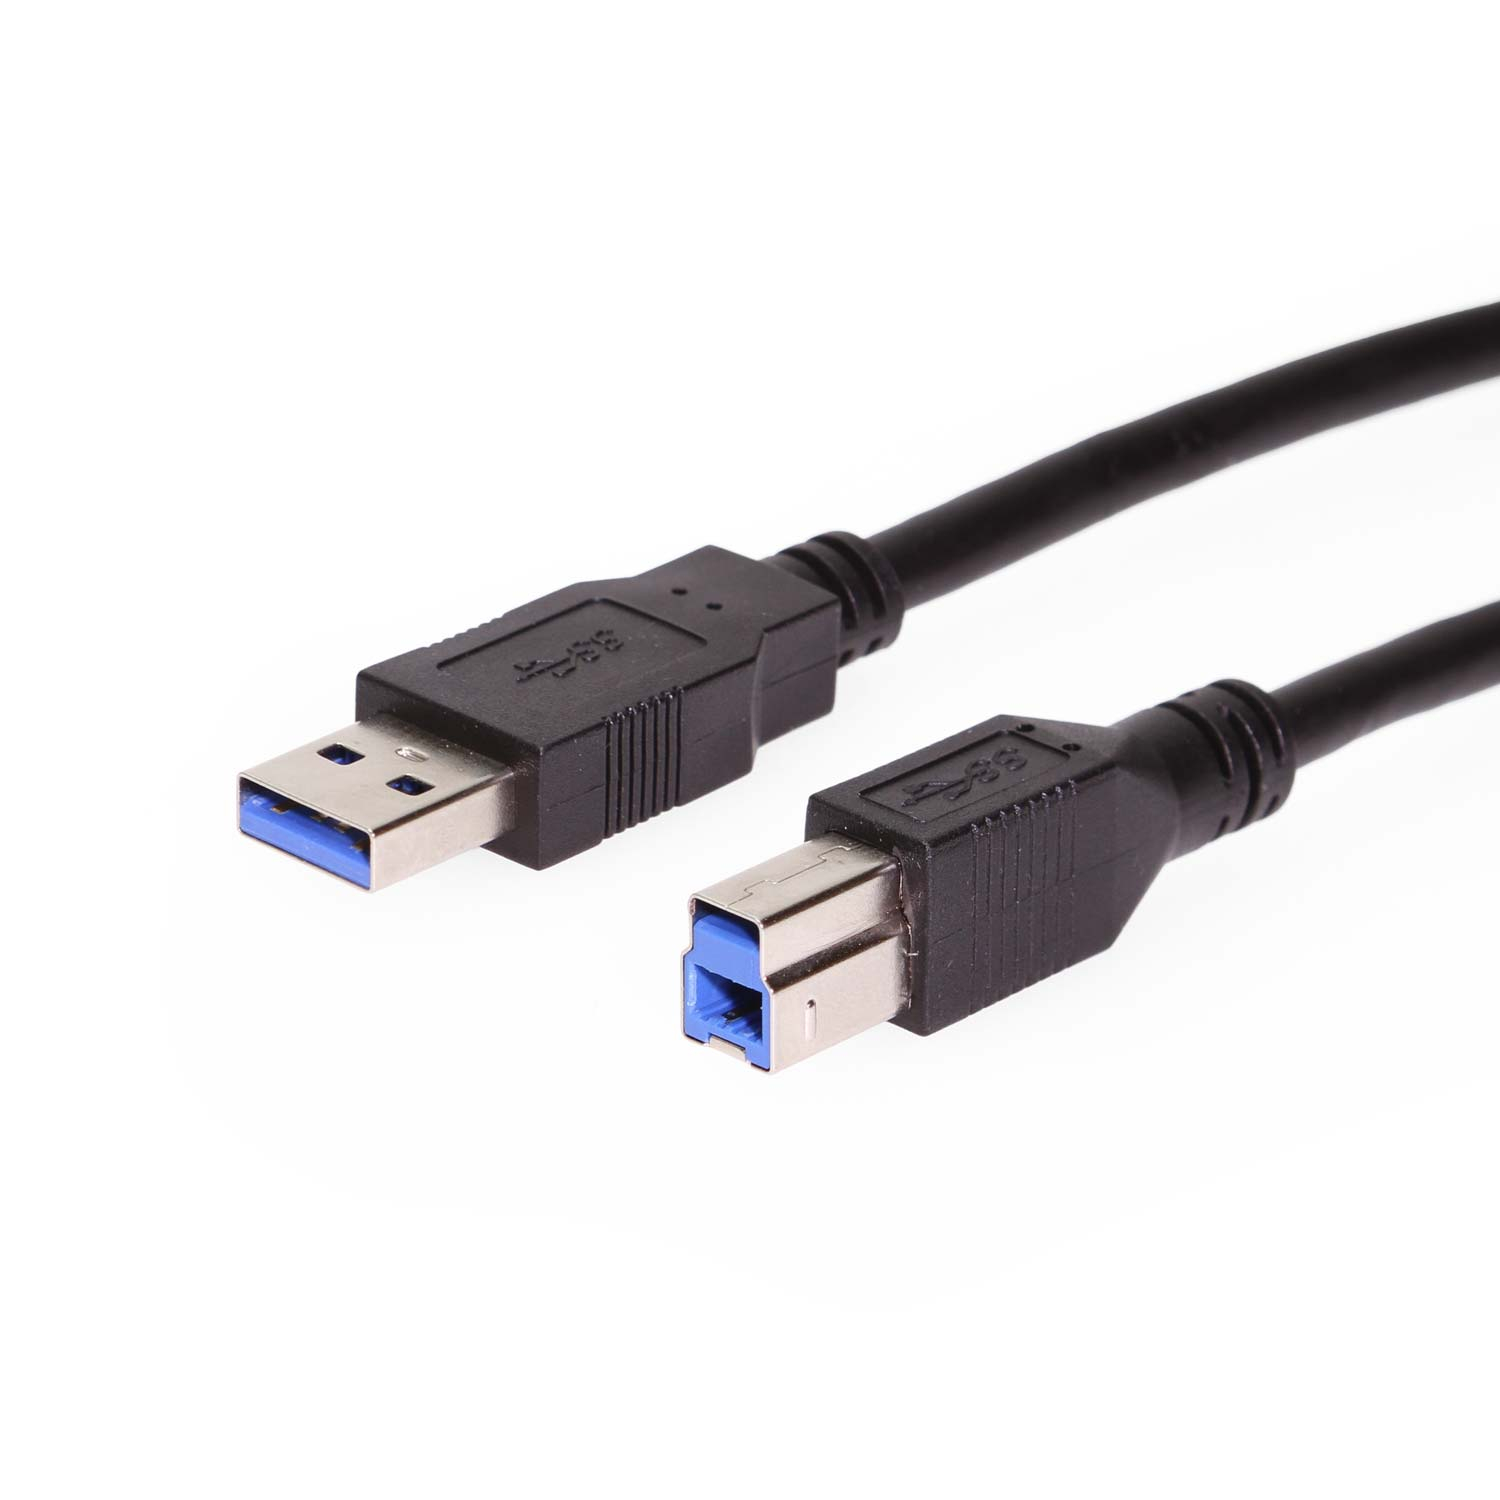 dorp munt Kruik 1ft USB 3.2 Gen 1 Cable A Male to B Male Device Cable